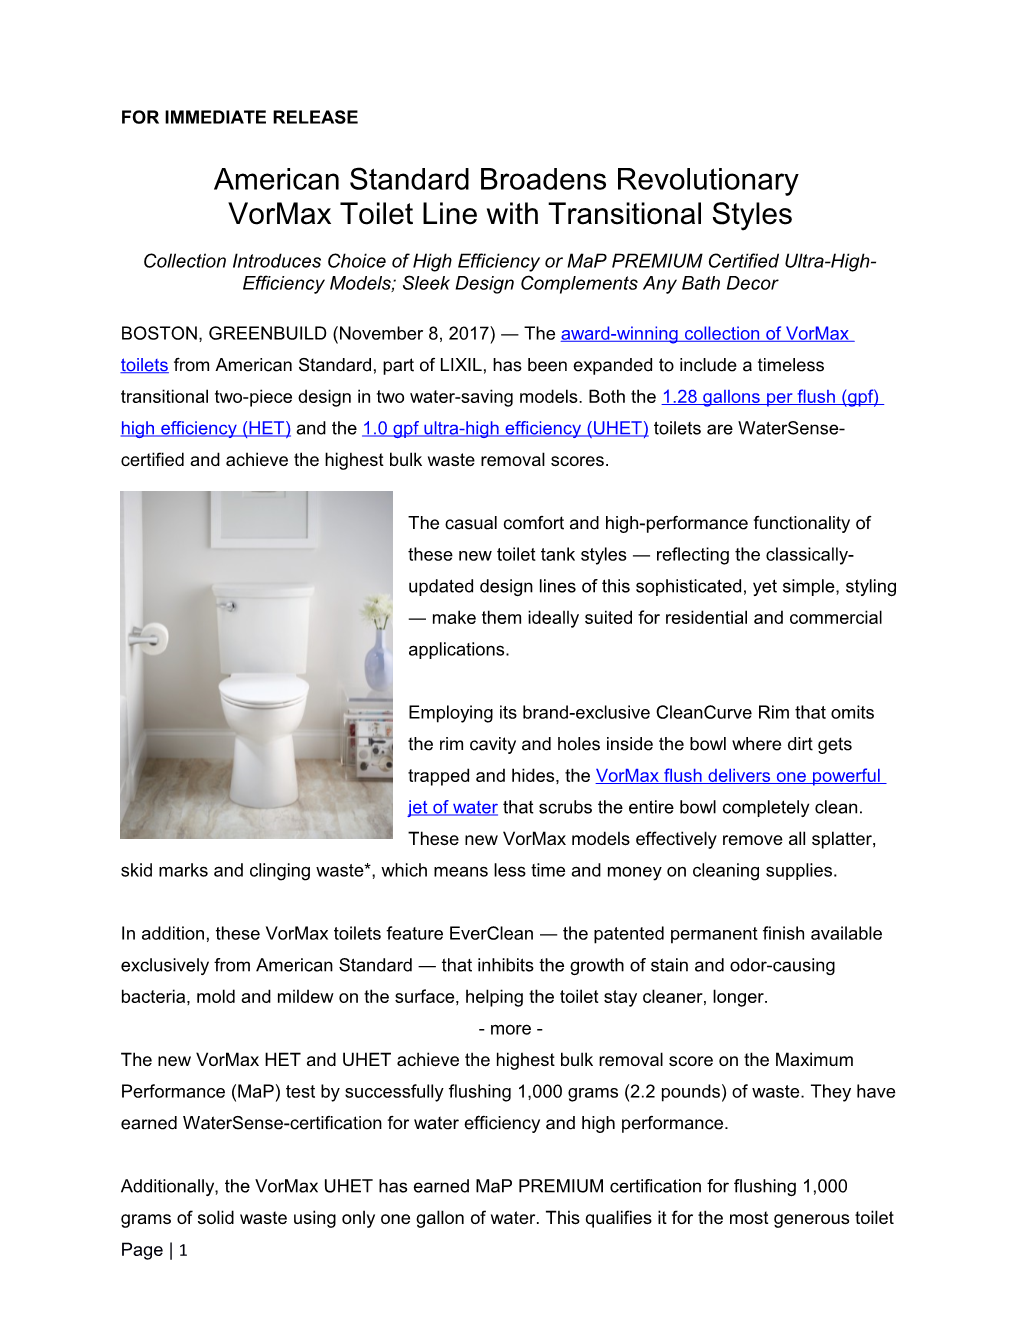 American Standard Broadens Revolutionary Vormax Toilet Line with Transitional Styles